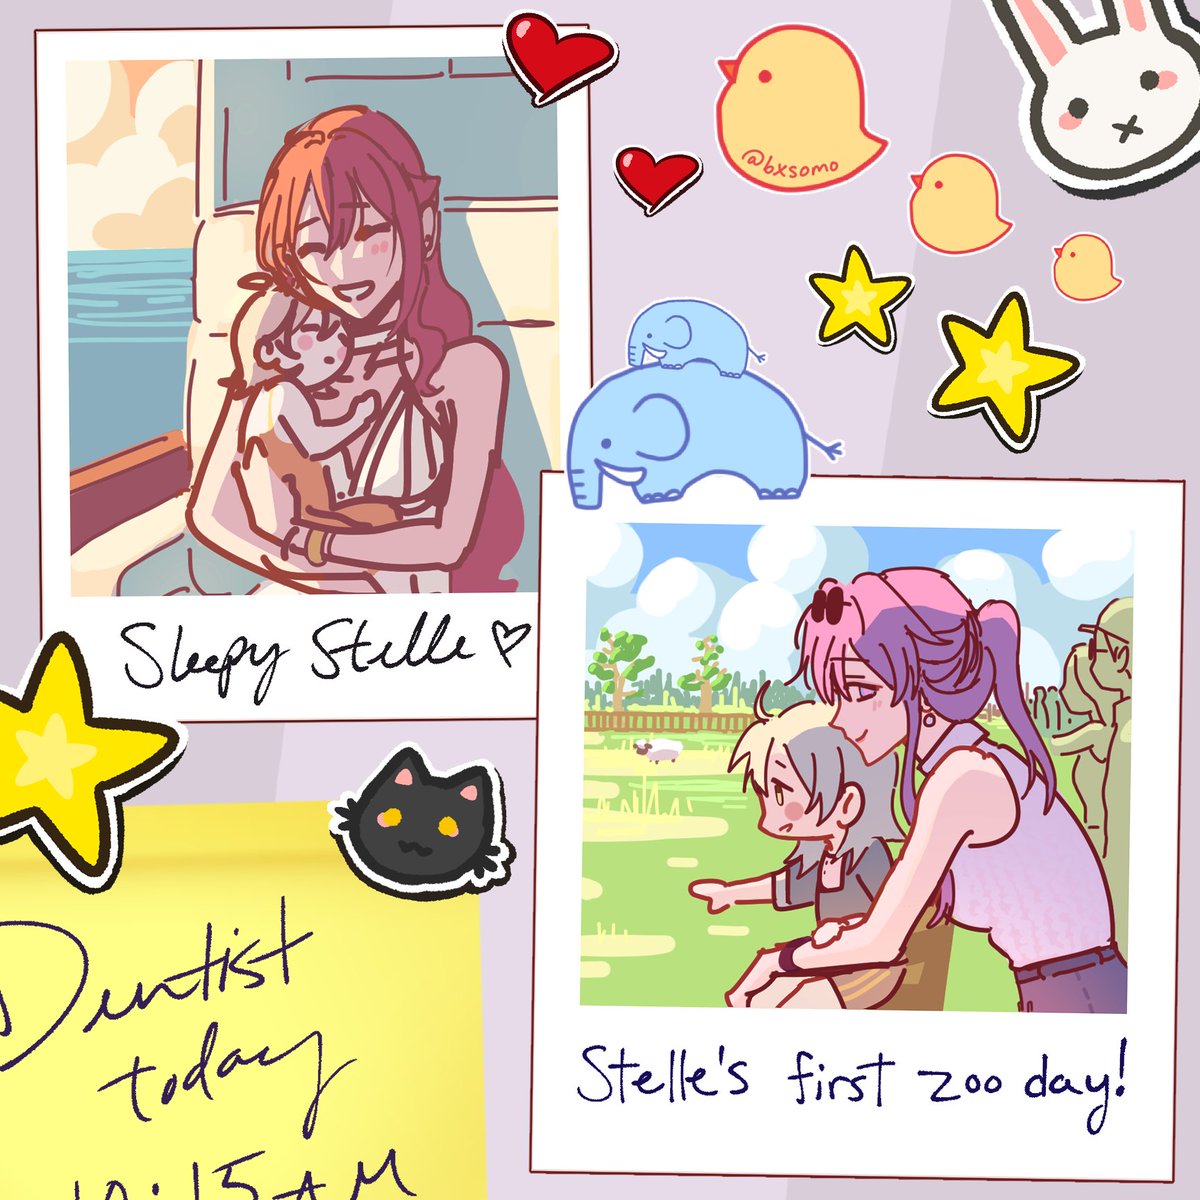 slice of life au where stelle's raised by 2 milfs and their only problems are doing laundry and taxes

#kafhime